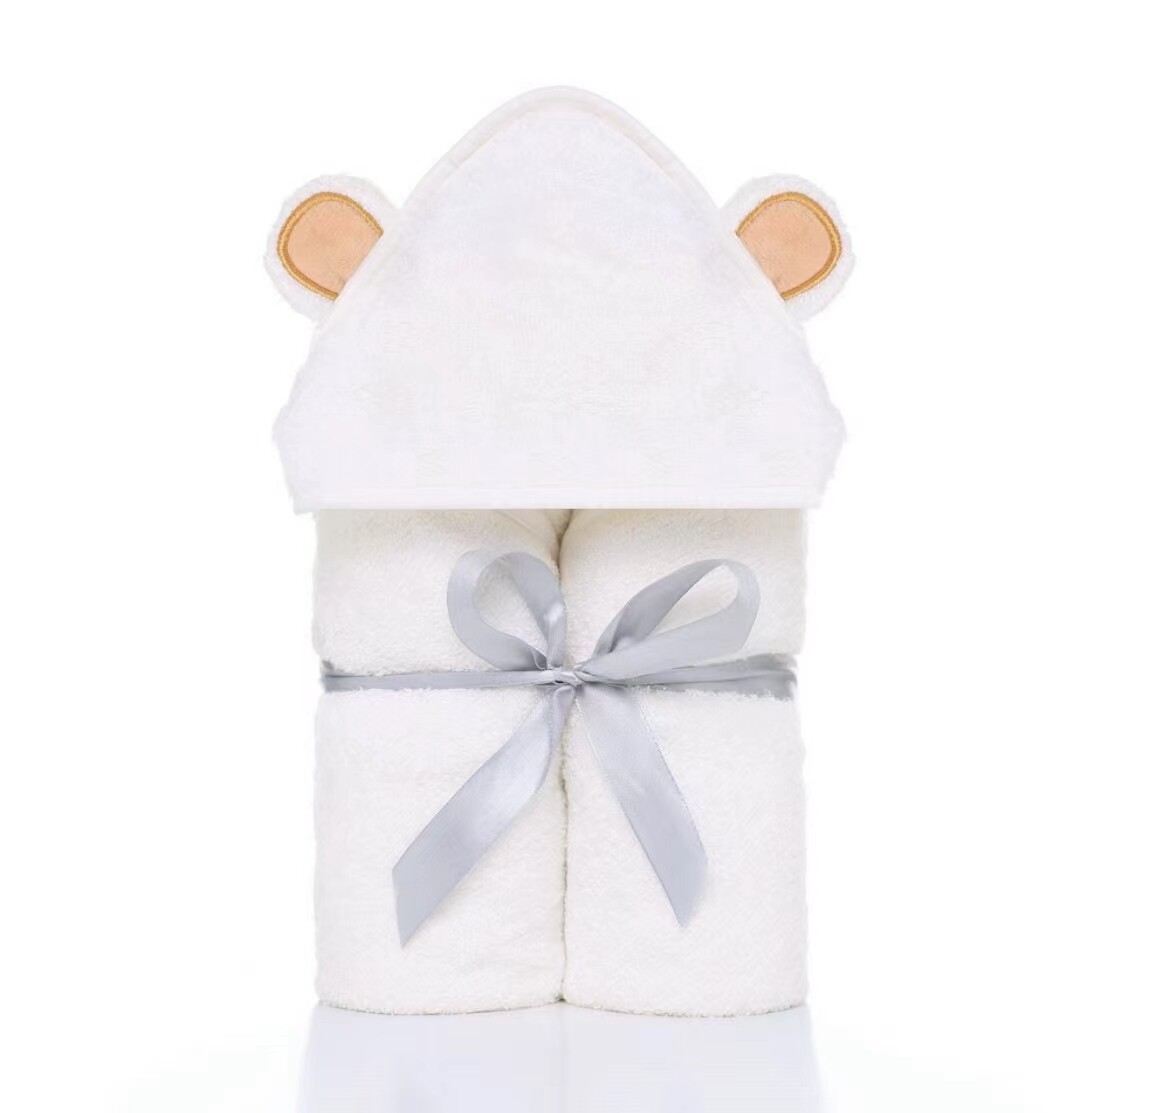 Bamboo Hooded Baby Towel,little bamboo hooded towel